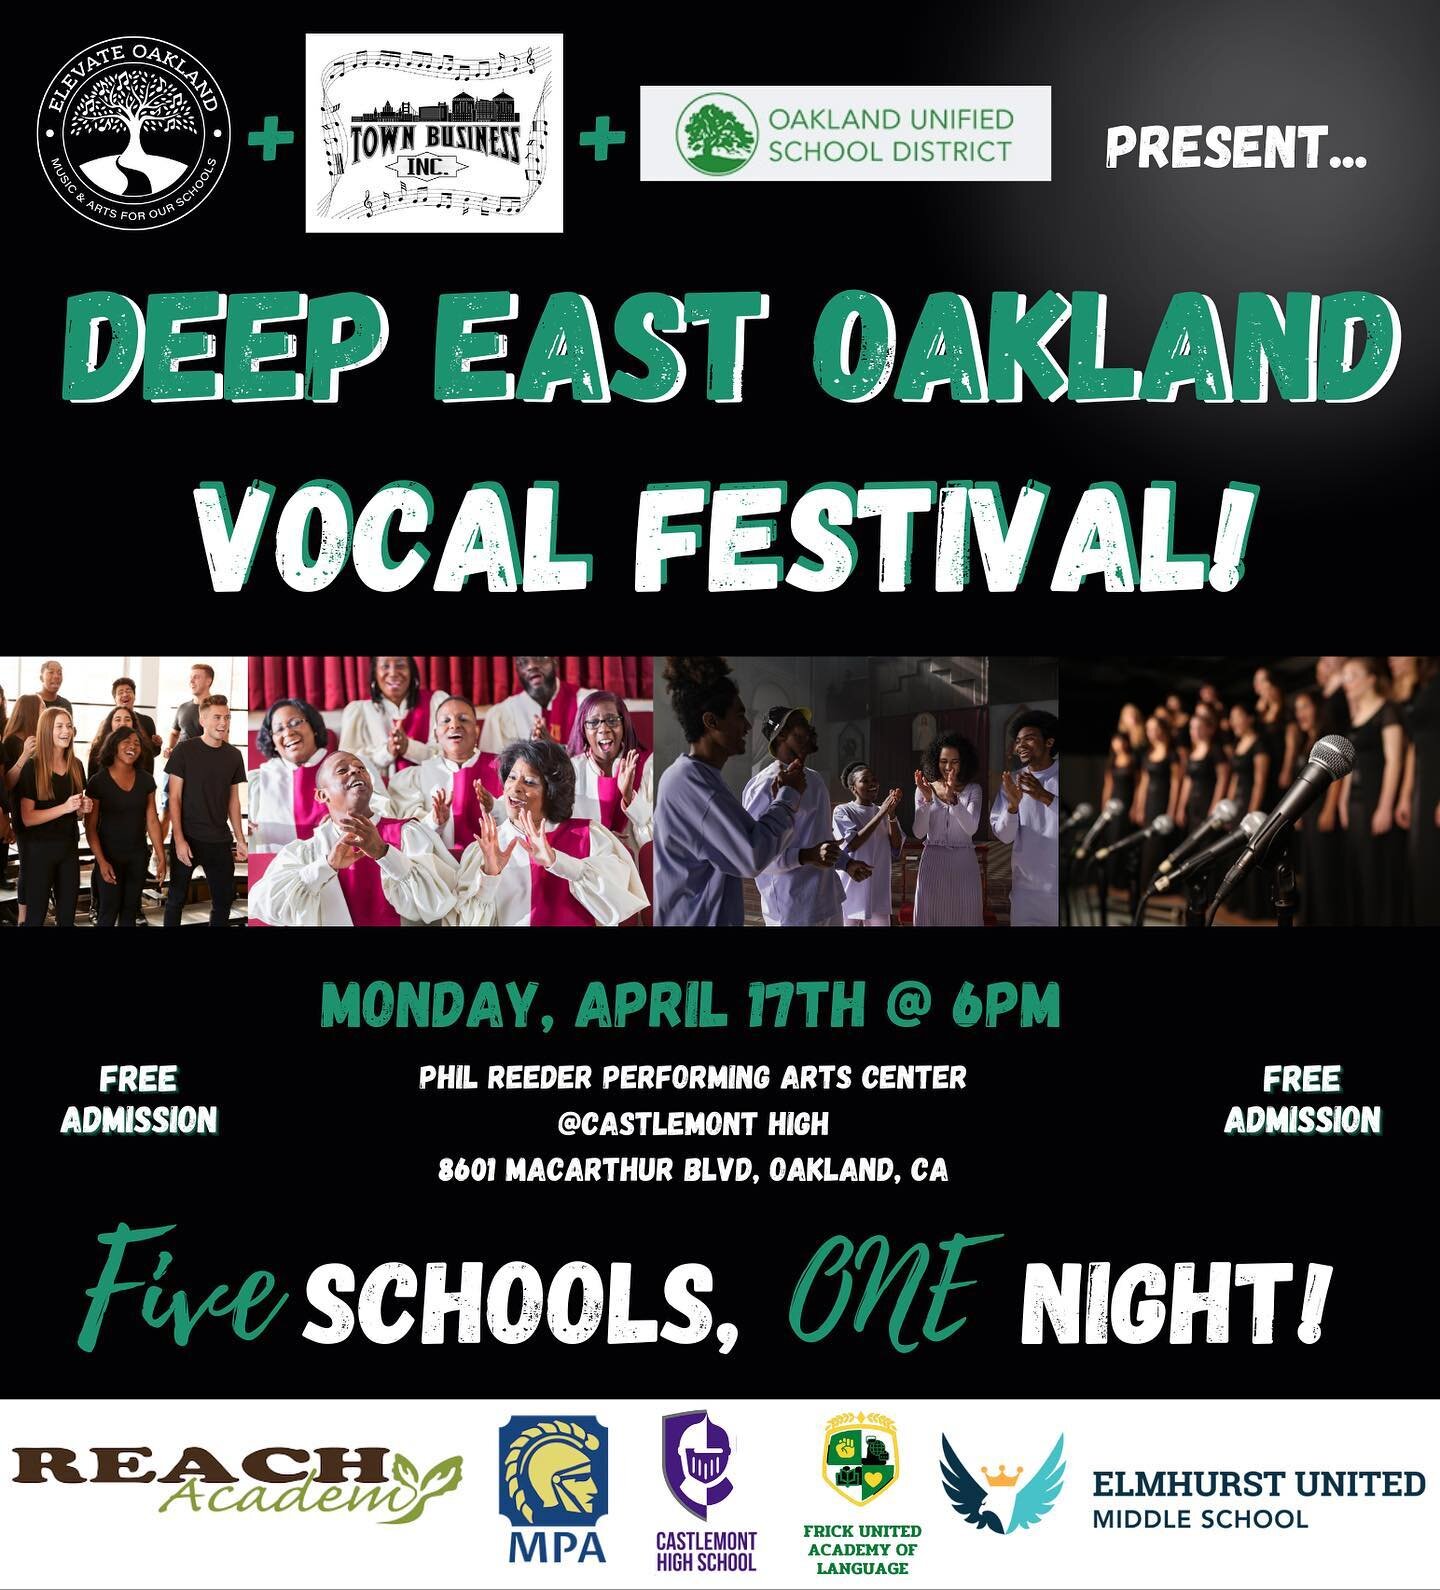 NEXT MONDAY! Come one, come all for a vocal music extravaganza in partnership with @ousd_arts and @keenanfoster13 of Town Business Inc. 🎤 The Deep East Oakland Festival is a culminating celebration of the beginnings of the revival of choral music pr